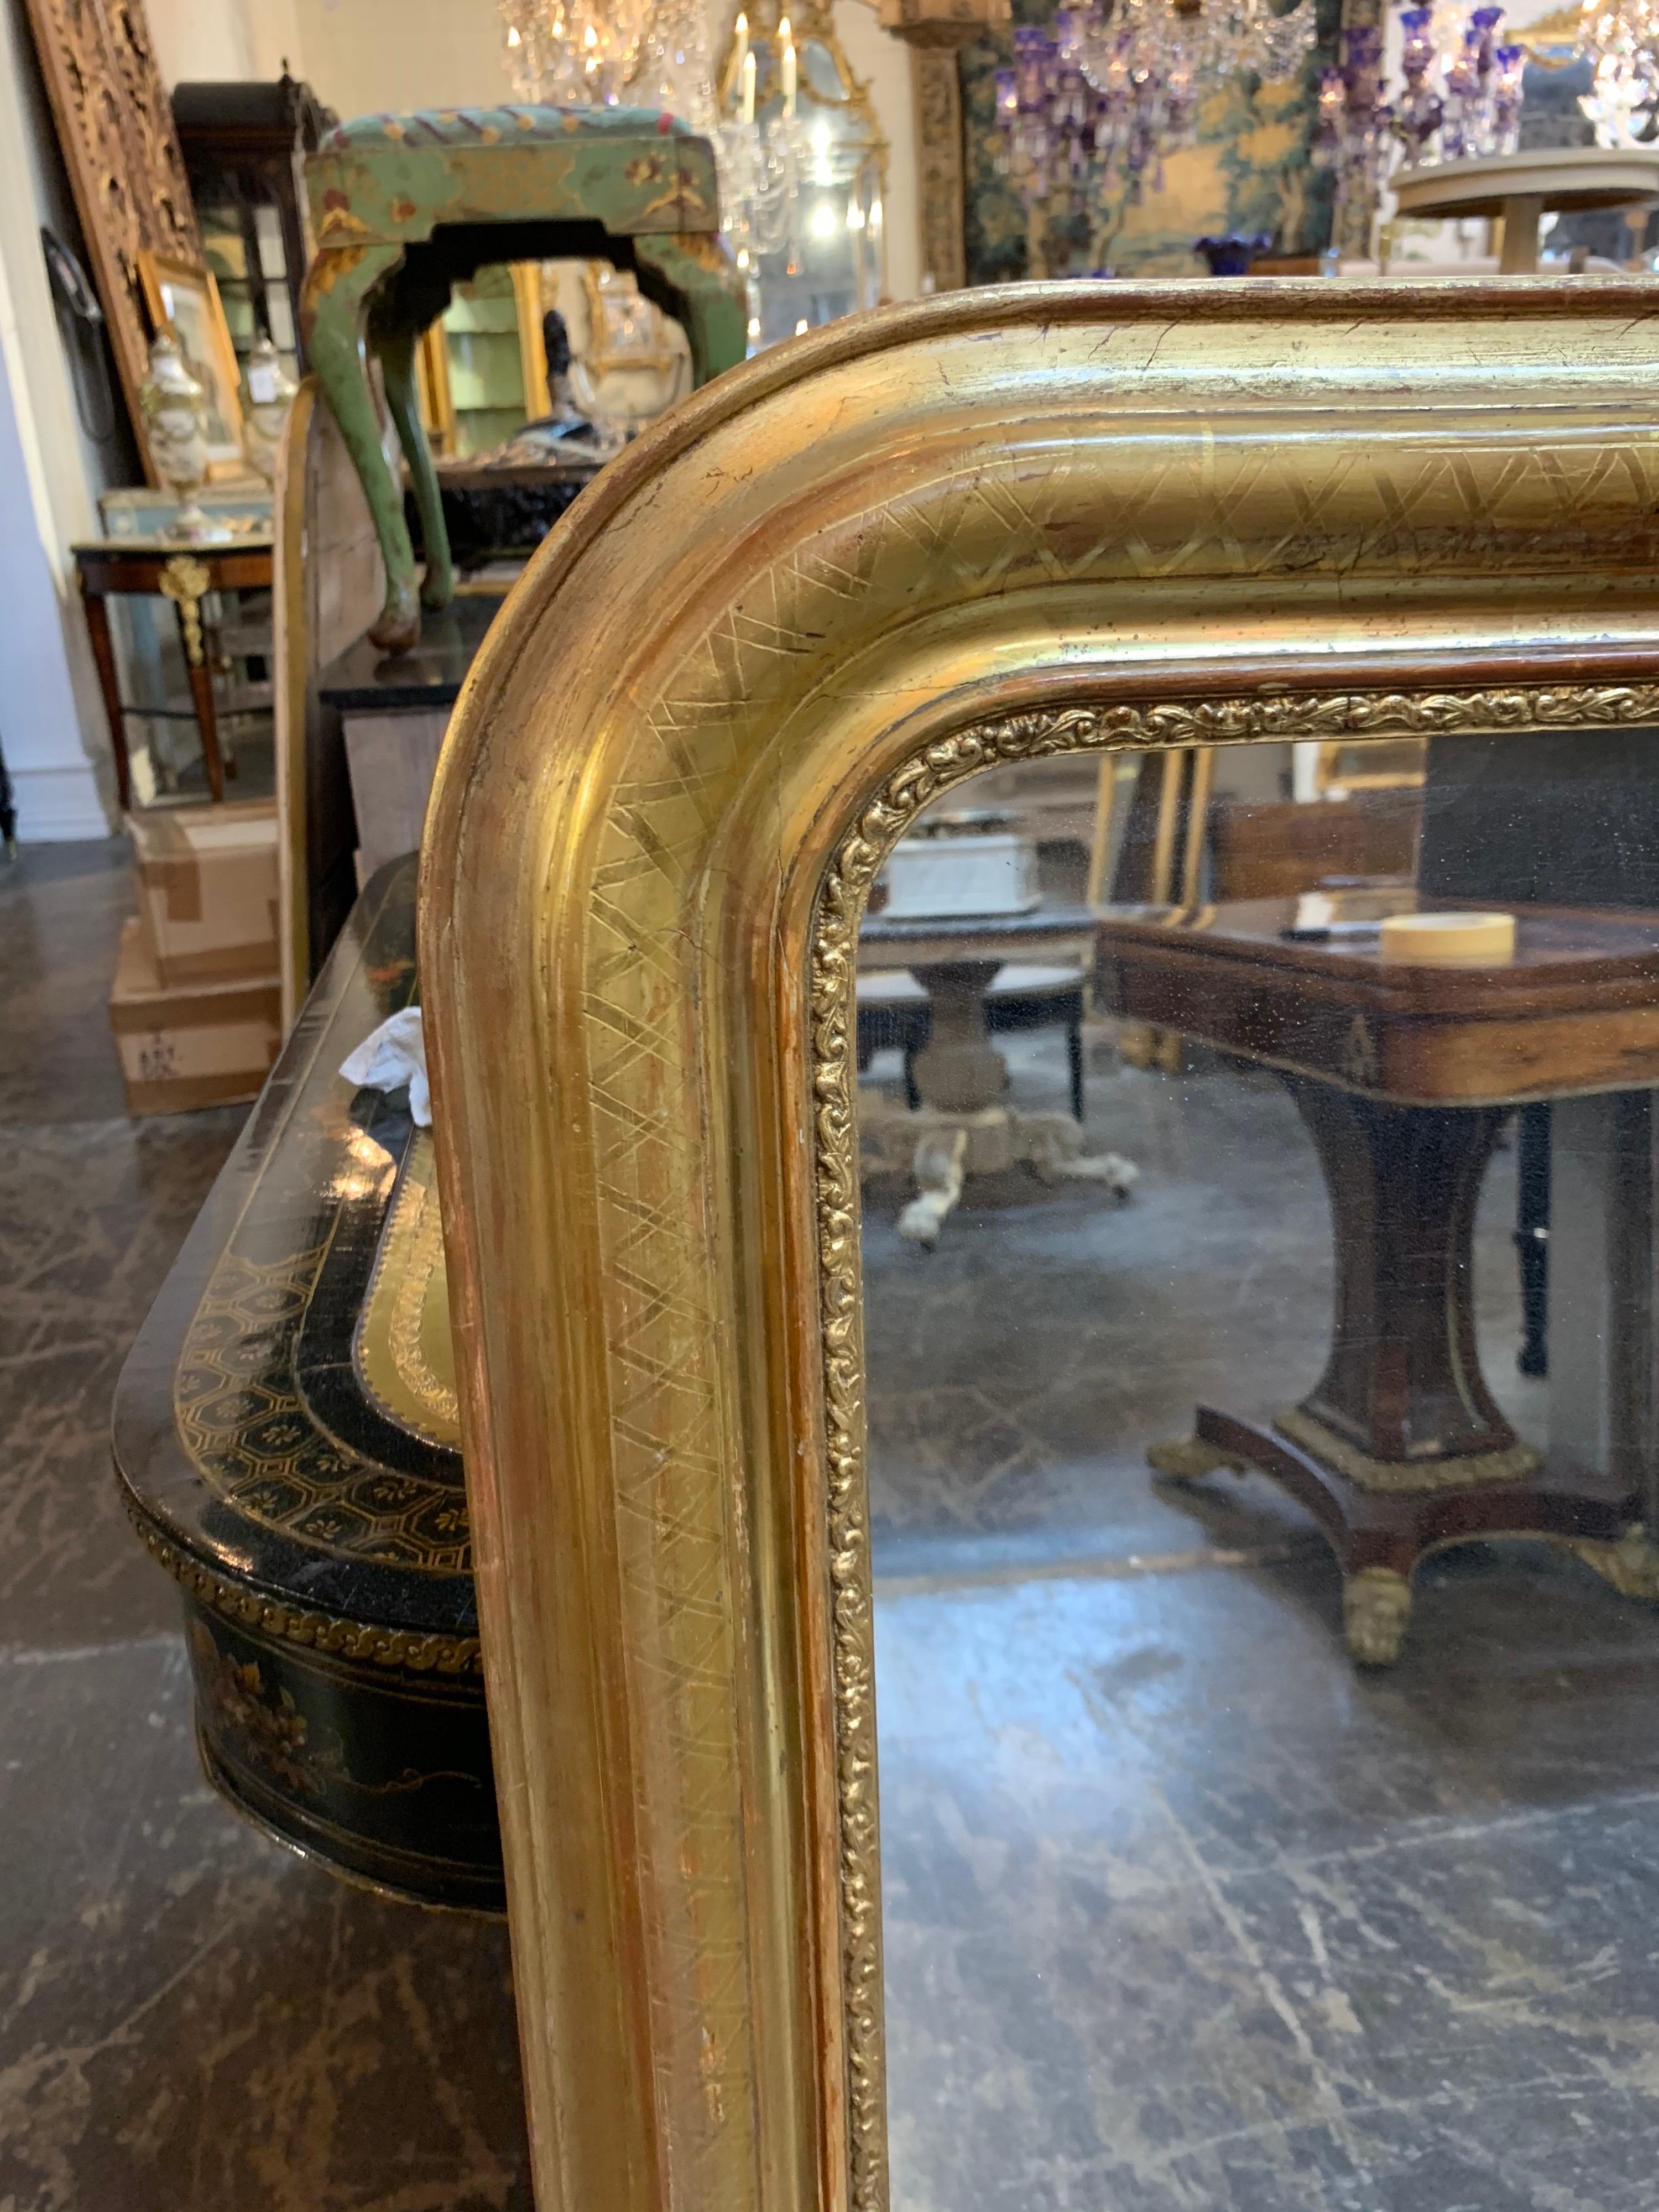 Gorgeous 19th century Louis Philippe mirror with X-pattern. This piece also has a decorative inner border and red undertones. Creatives a beautiful image!